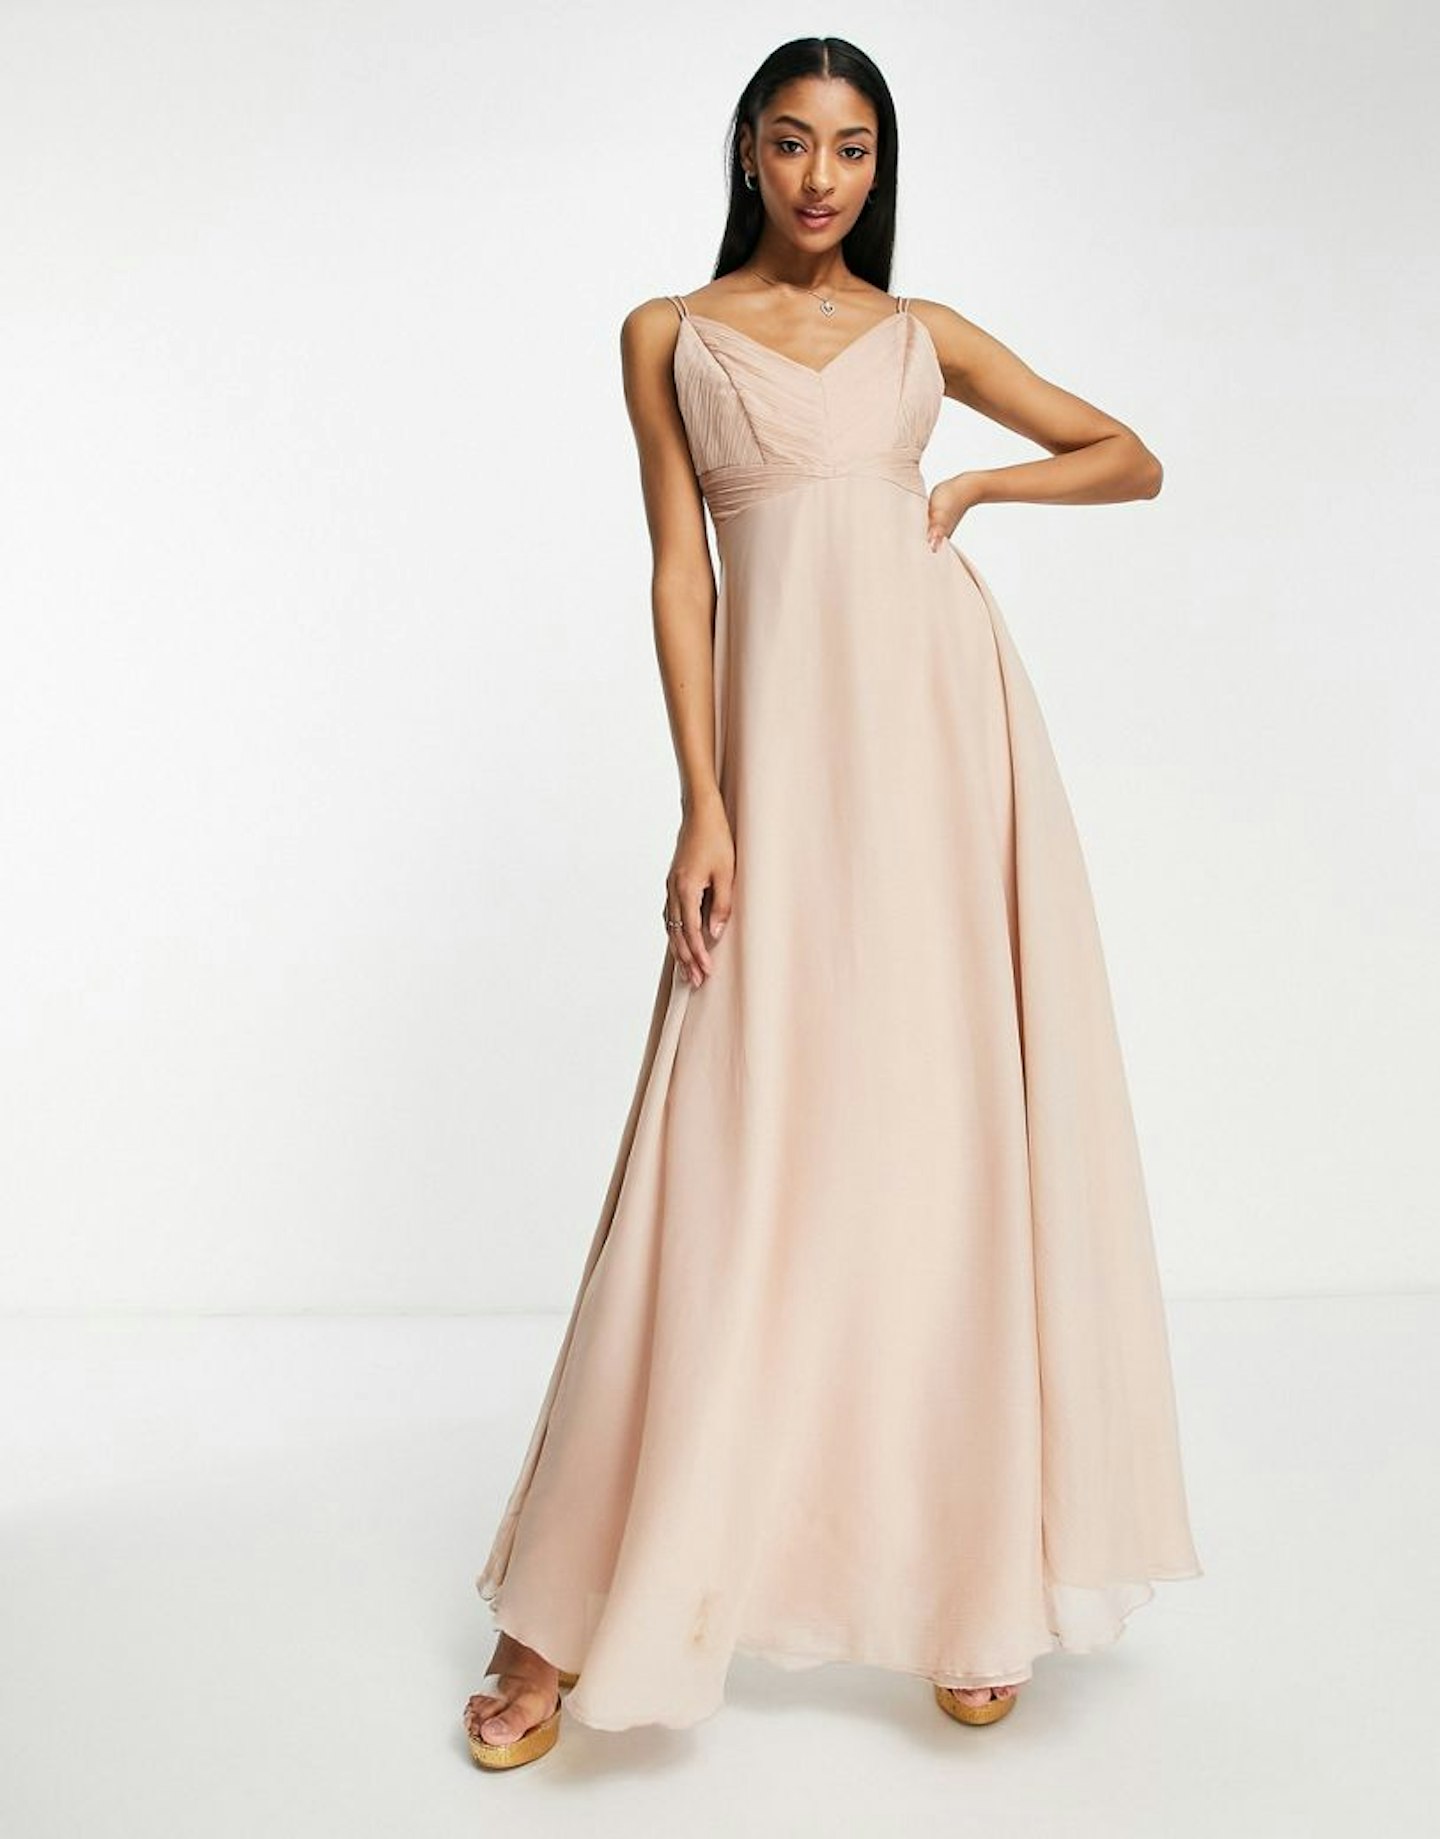 ASOS DESIGN Bridesmaid Cami Maxi Dress With Ruched Bodice and Tie Waist in Blush